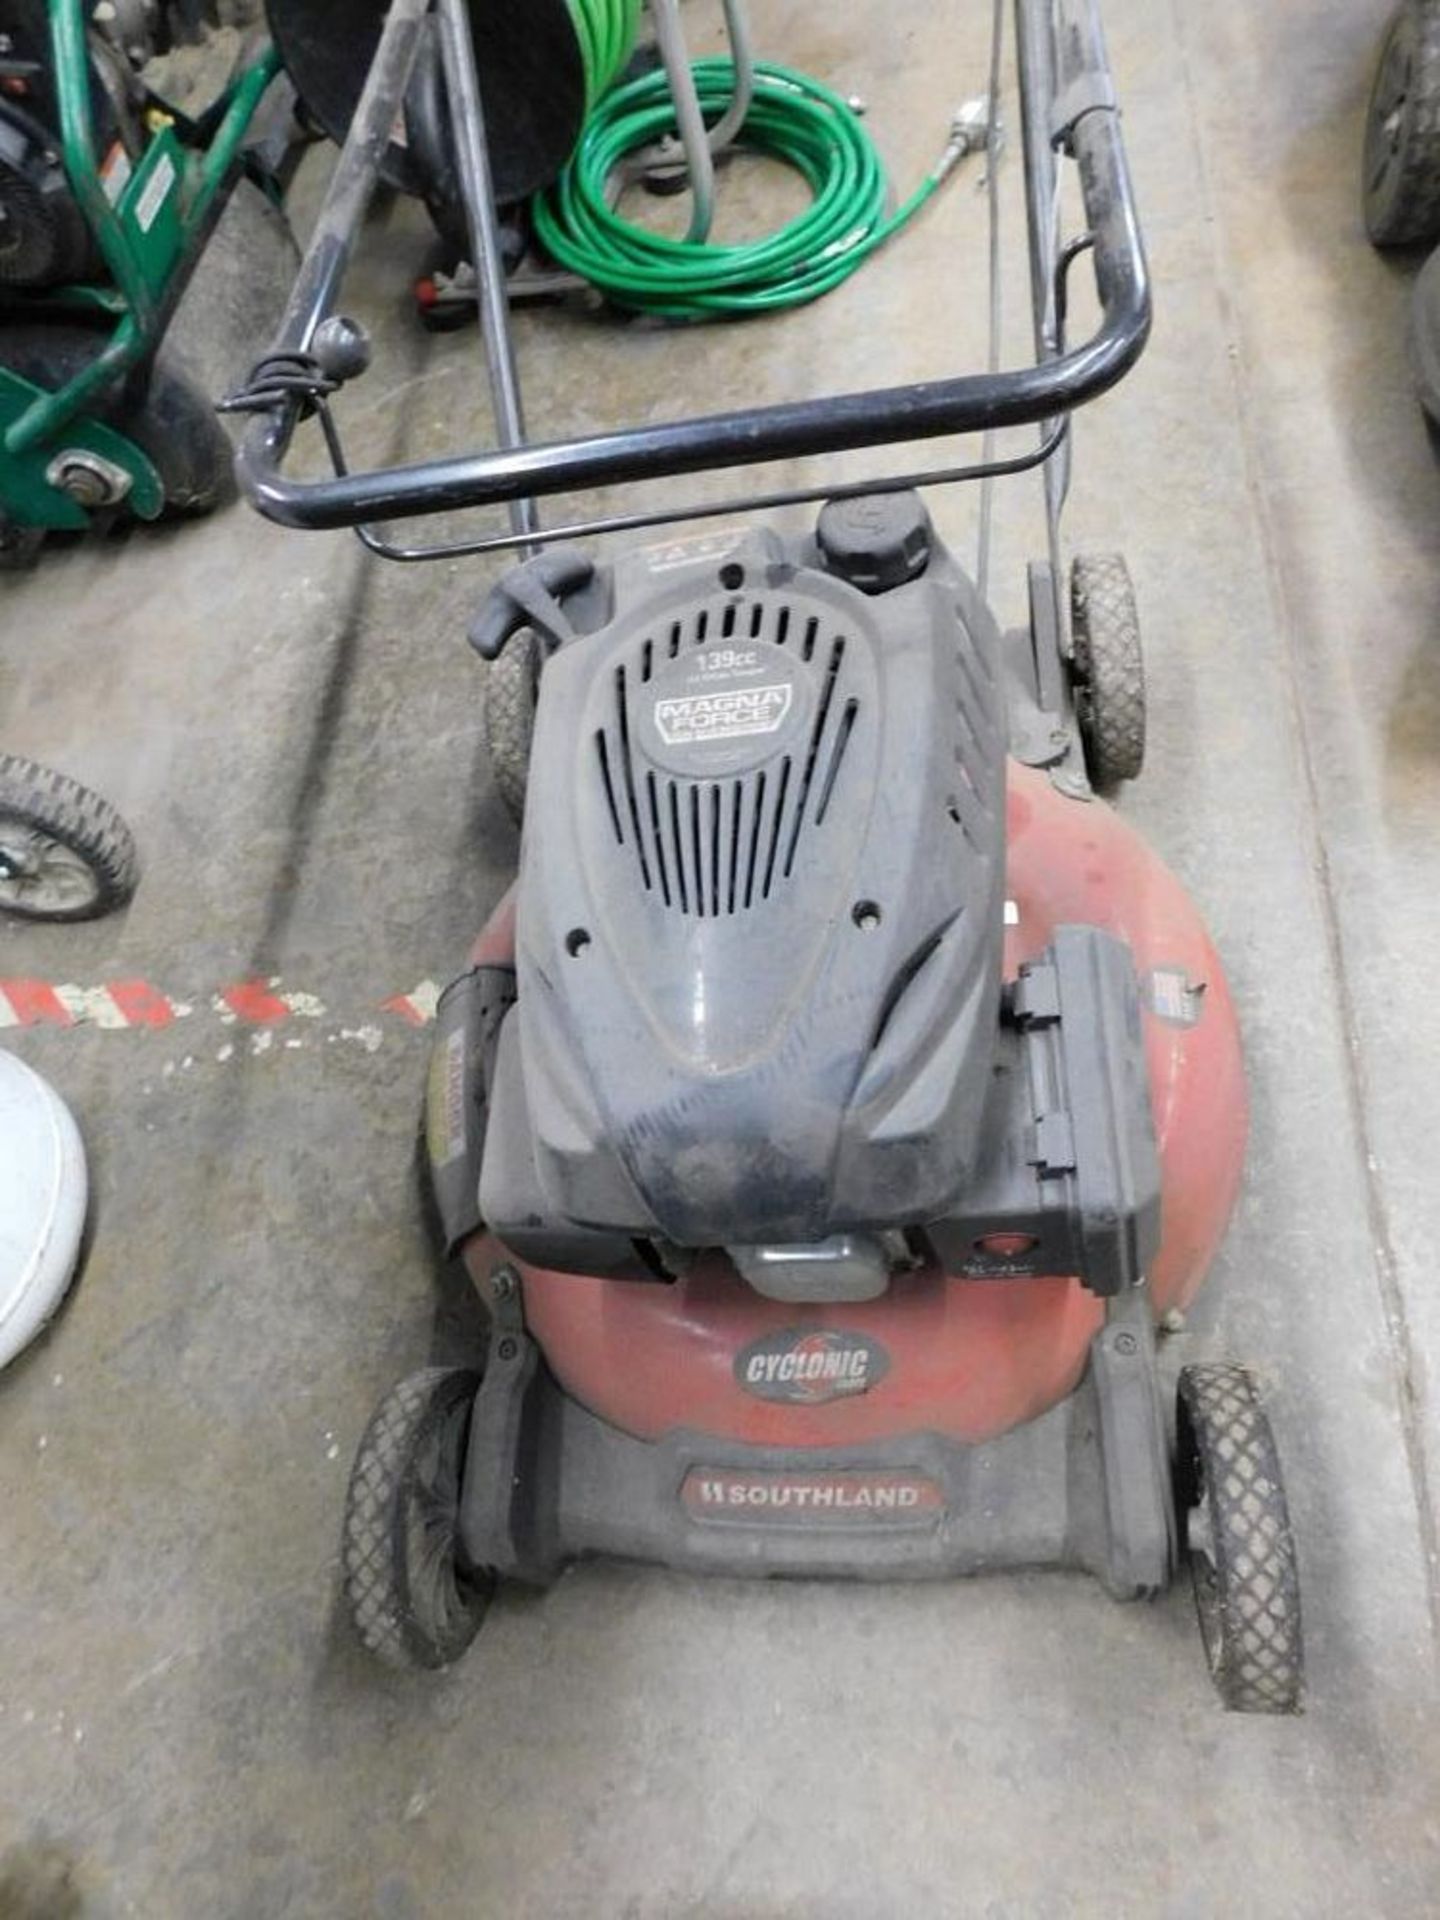 Southland Cyclonic Forge Mower (LOCATION: 318 N. Milwaukee Ave., Wheeling, IL 60090) - Image 3 of 4